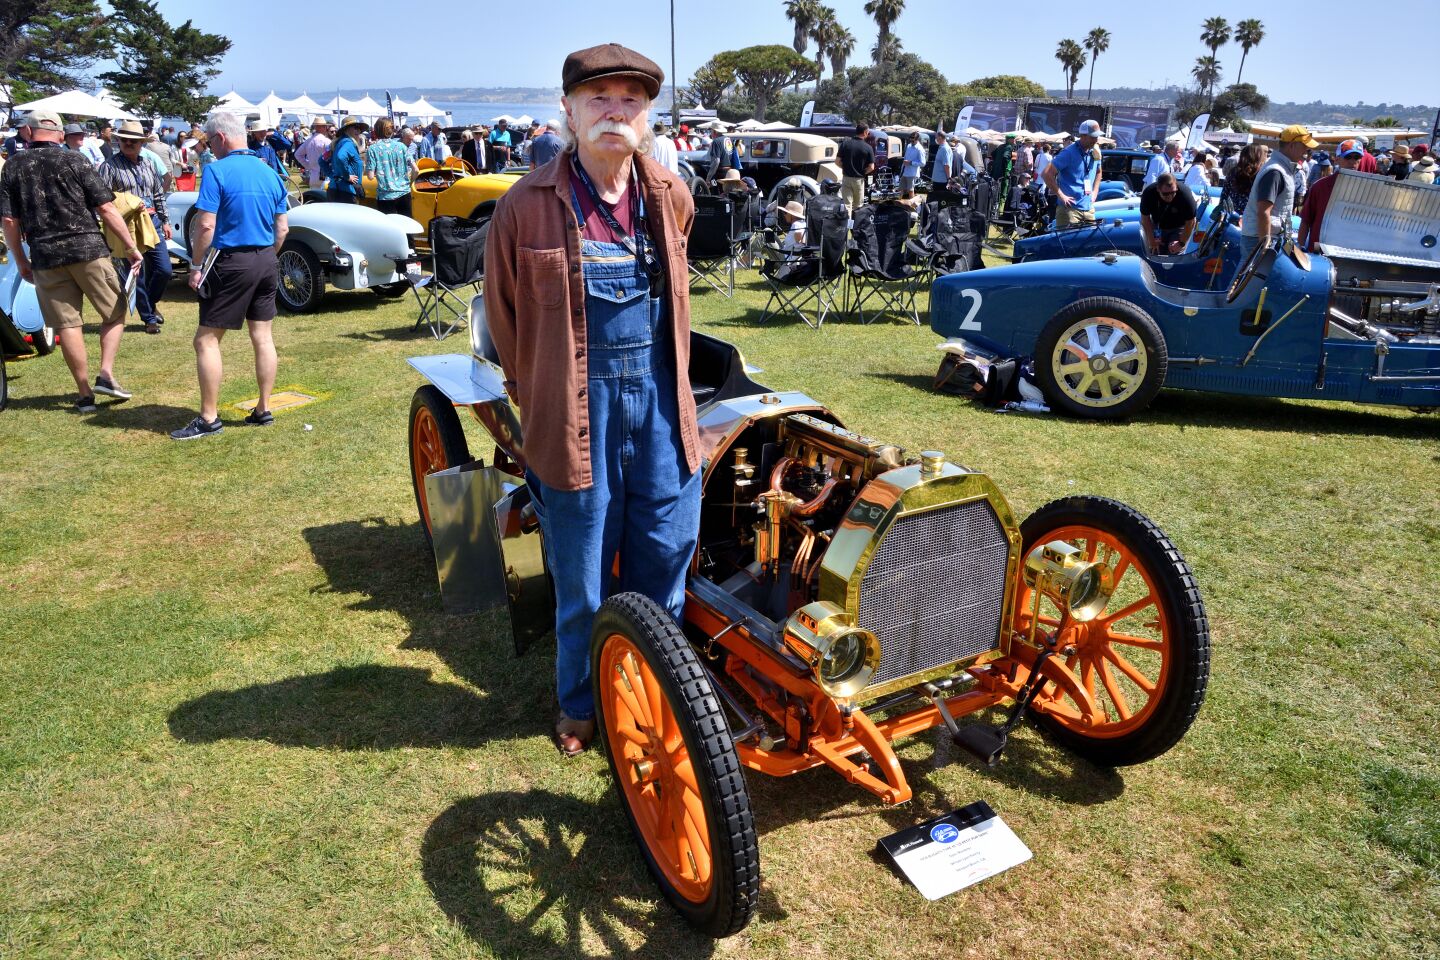 Robin Miller, 1908 Bugatti Type 10 (the first Bugatti built!), from the William Lyon Family car collection